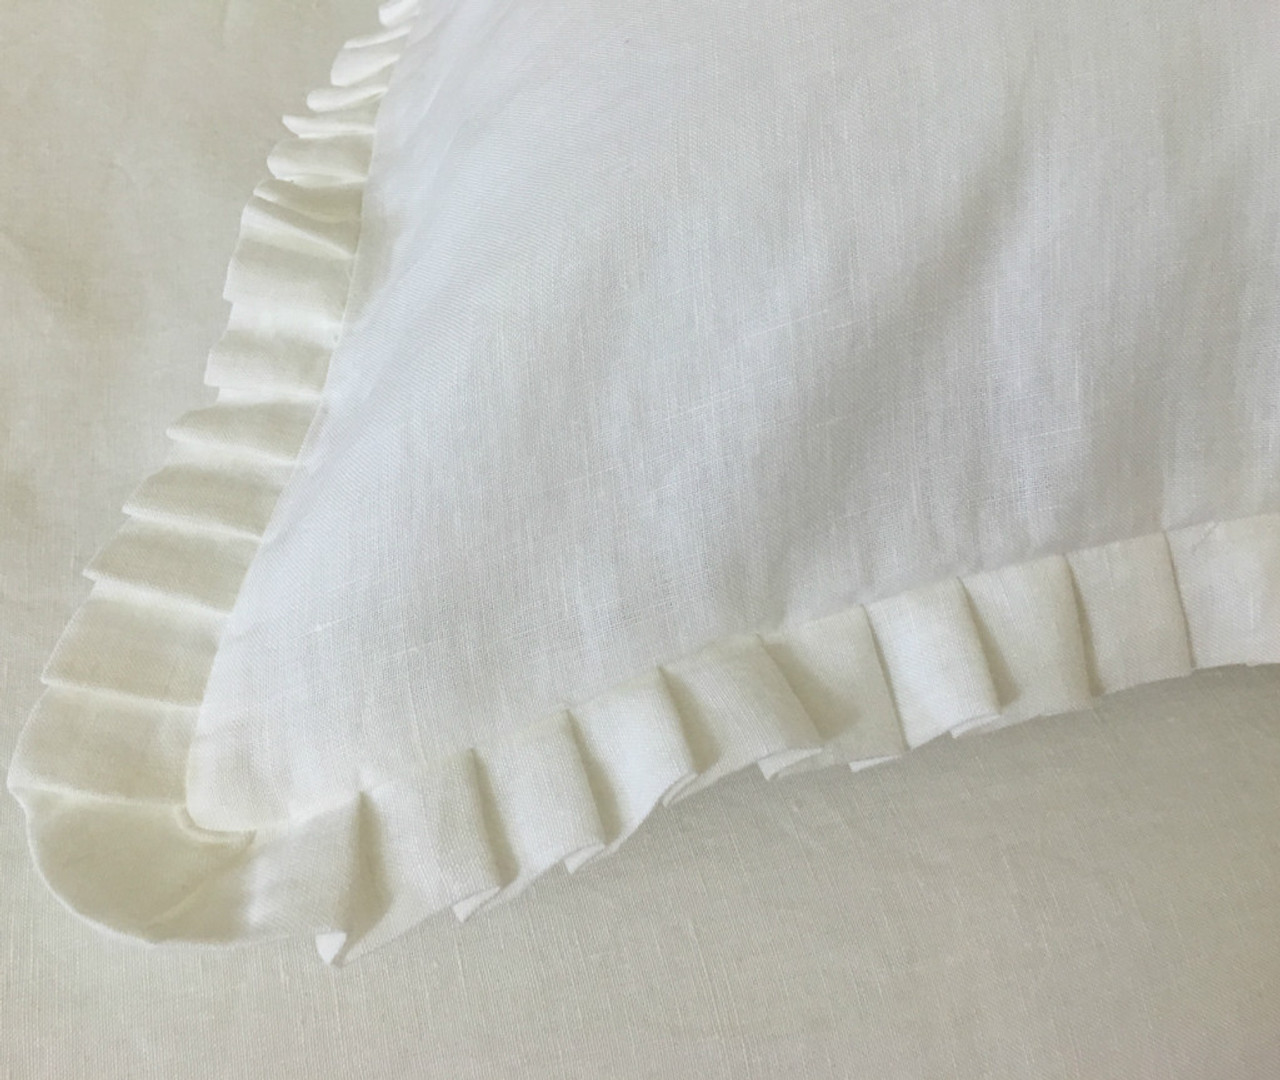 Linen Duvet Cover with Pleated ruffles - White, Grey, Cream, Pink, Blue ...